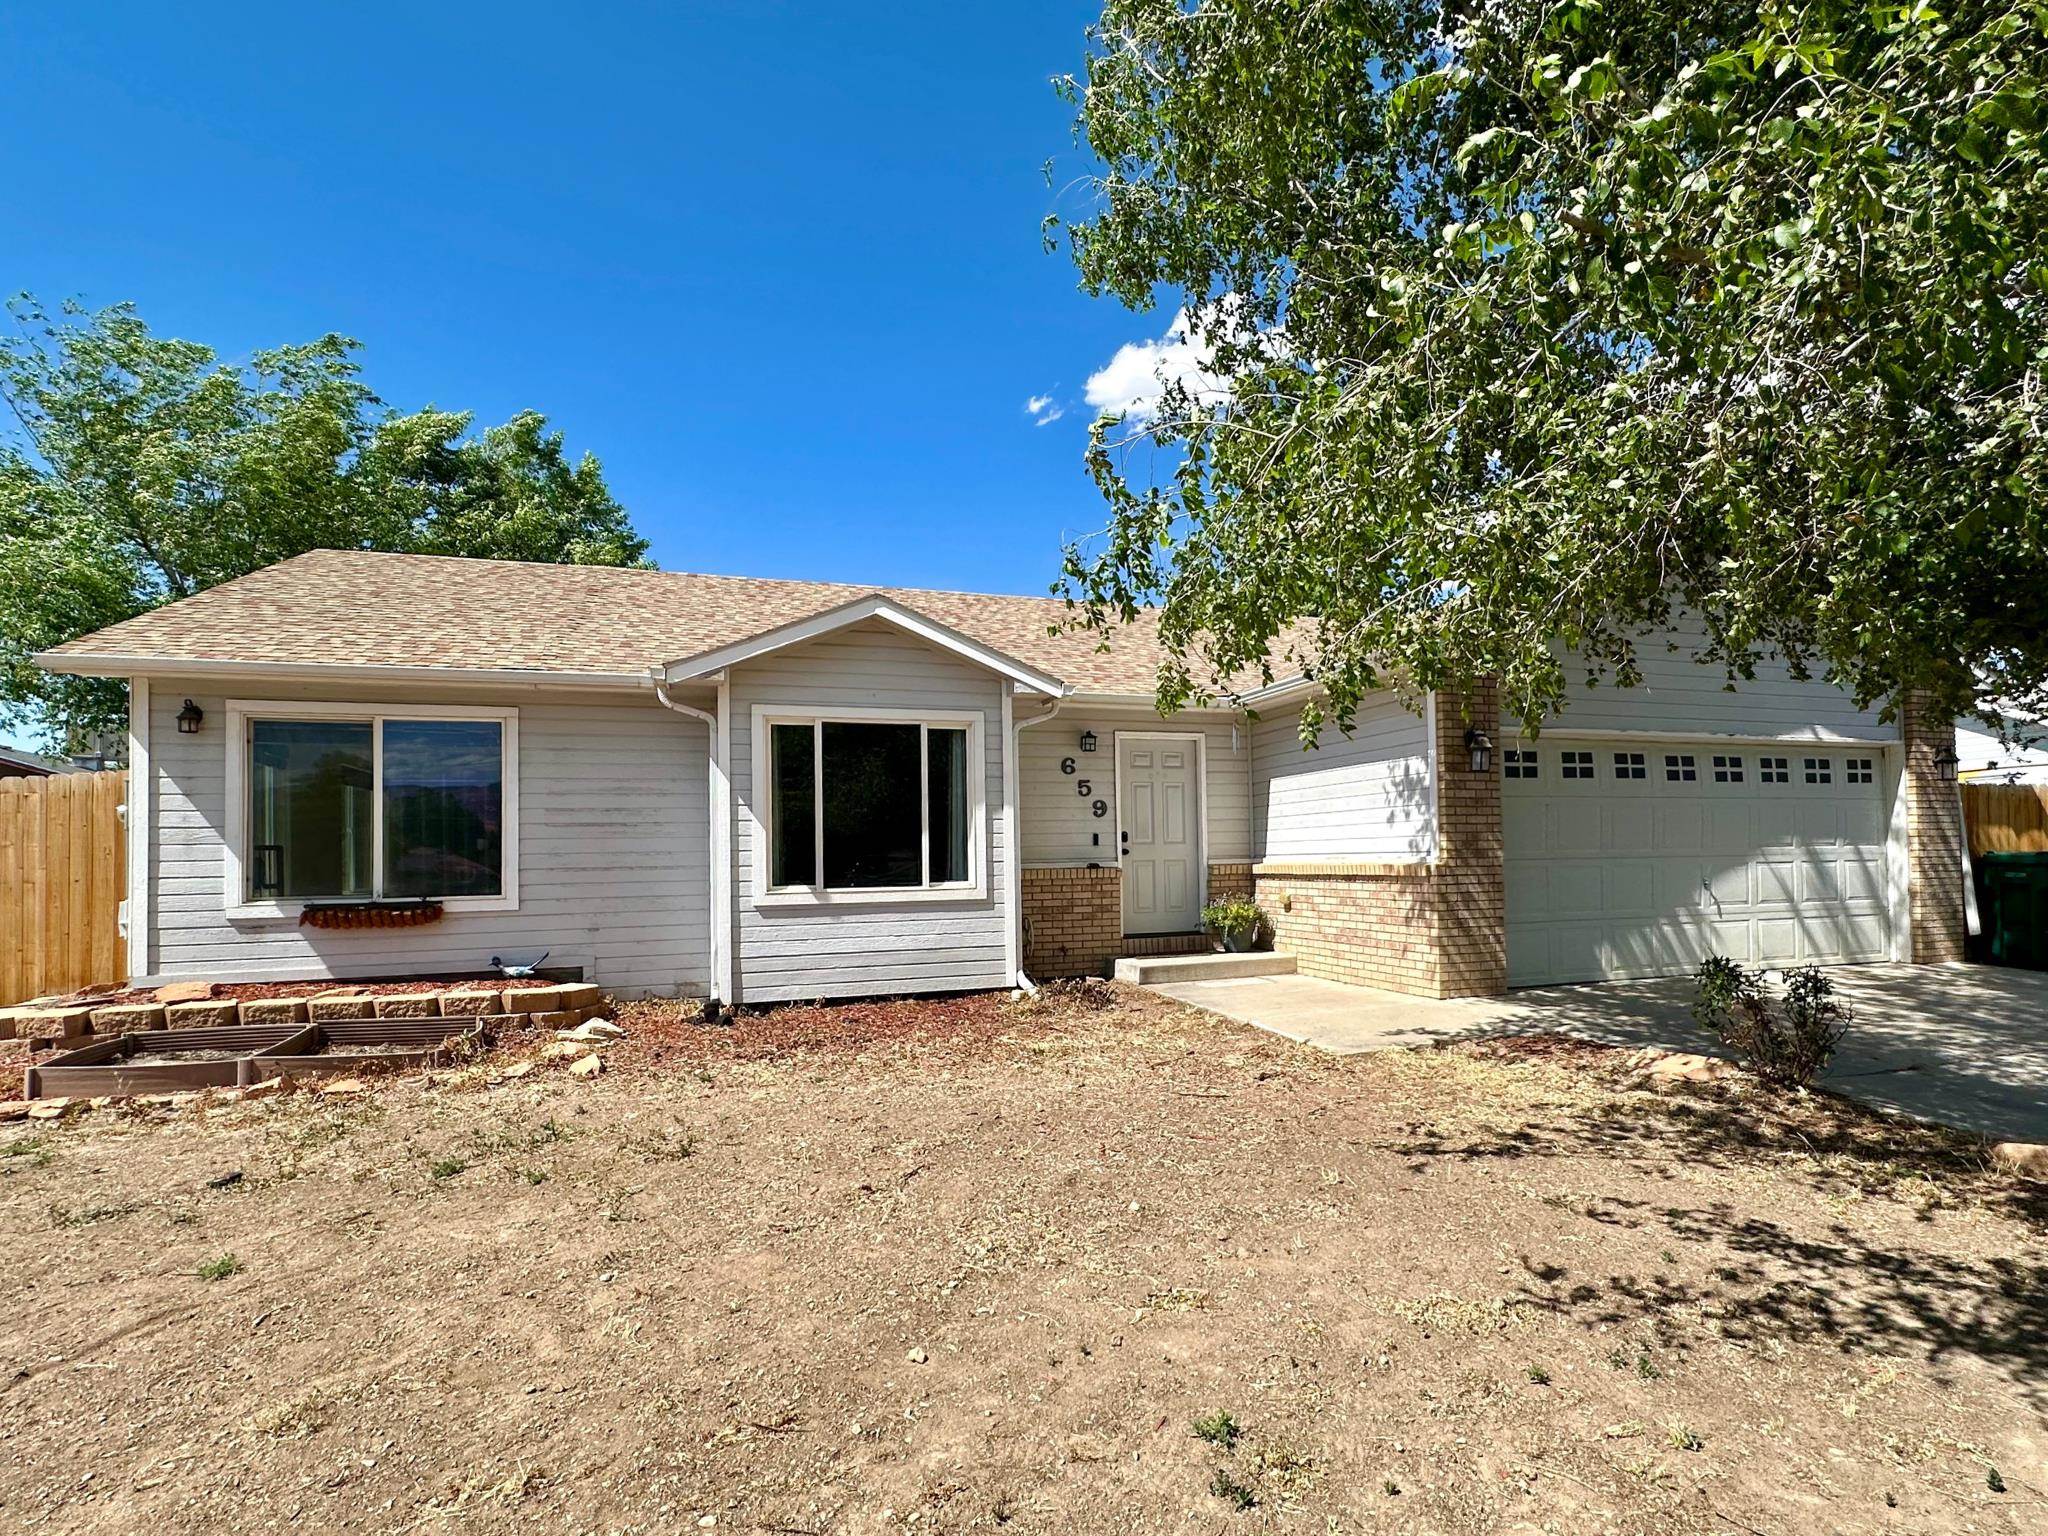 Great location for this 3 Bed / 2 Bath Ranch style home in Fruita.  You have to get inside to truly appreciate everything that this property has to offer including beautiful floors and other recent updates to the home.   There is a large living area along with a spacious dining / sun room located just off of the Kitchen.  The Primary  Suite includes an oversized walk-in shower and large walk-in closet.   The exterior of the property has a covered patio and a fully fenced backyard area.  All appliances are included in the sale of the property.  The yard is a blank canvas waiting for the new homeowners to showcase their own personal design preference.